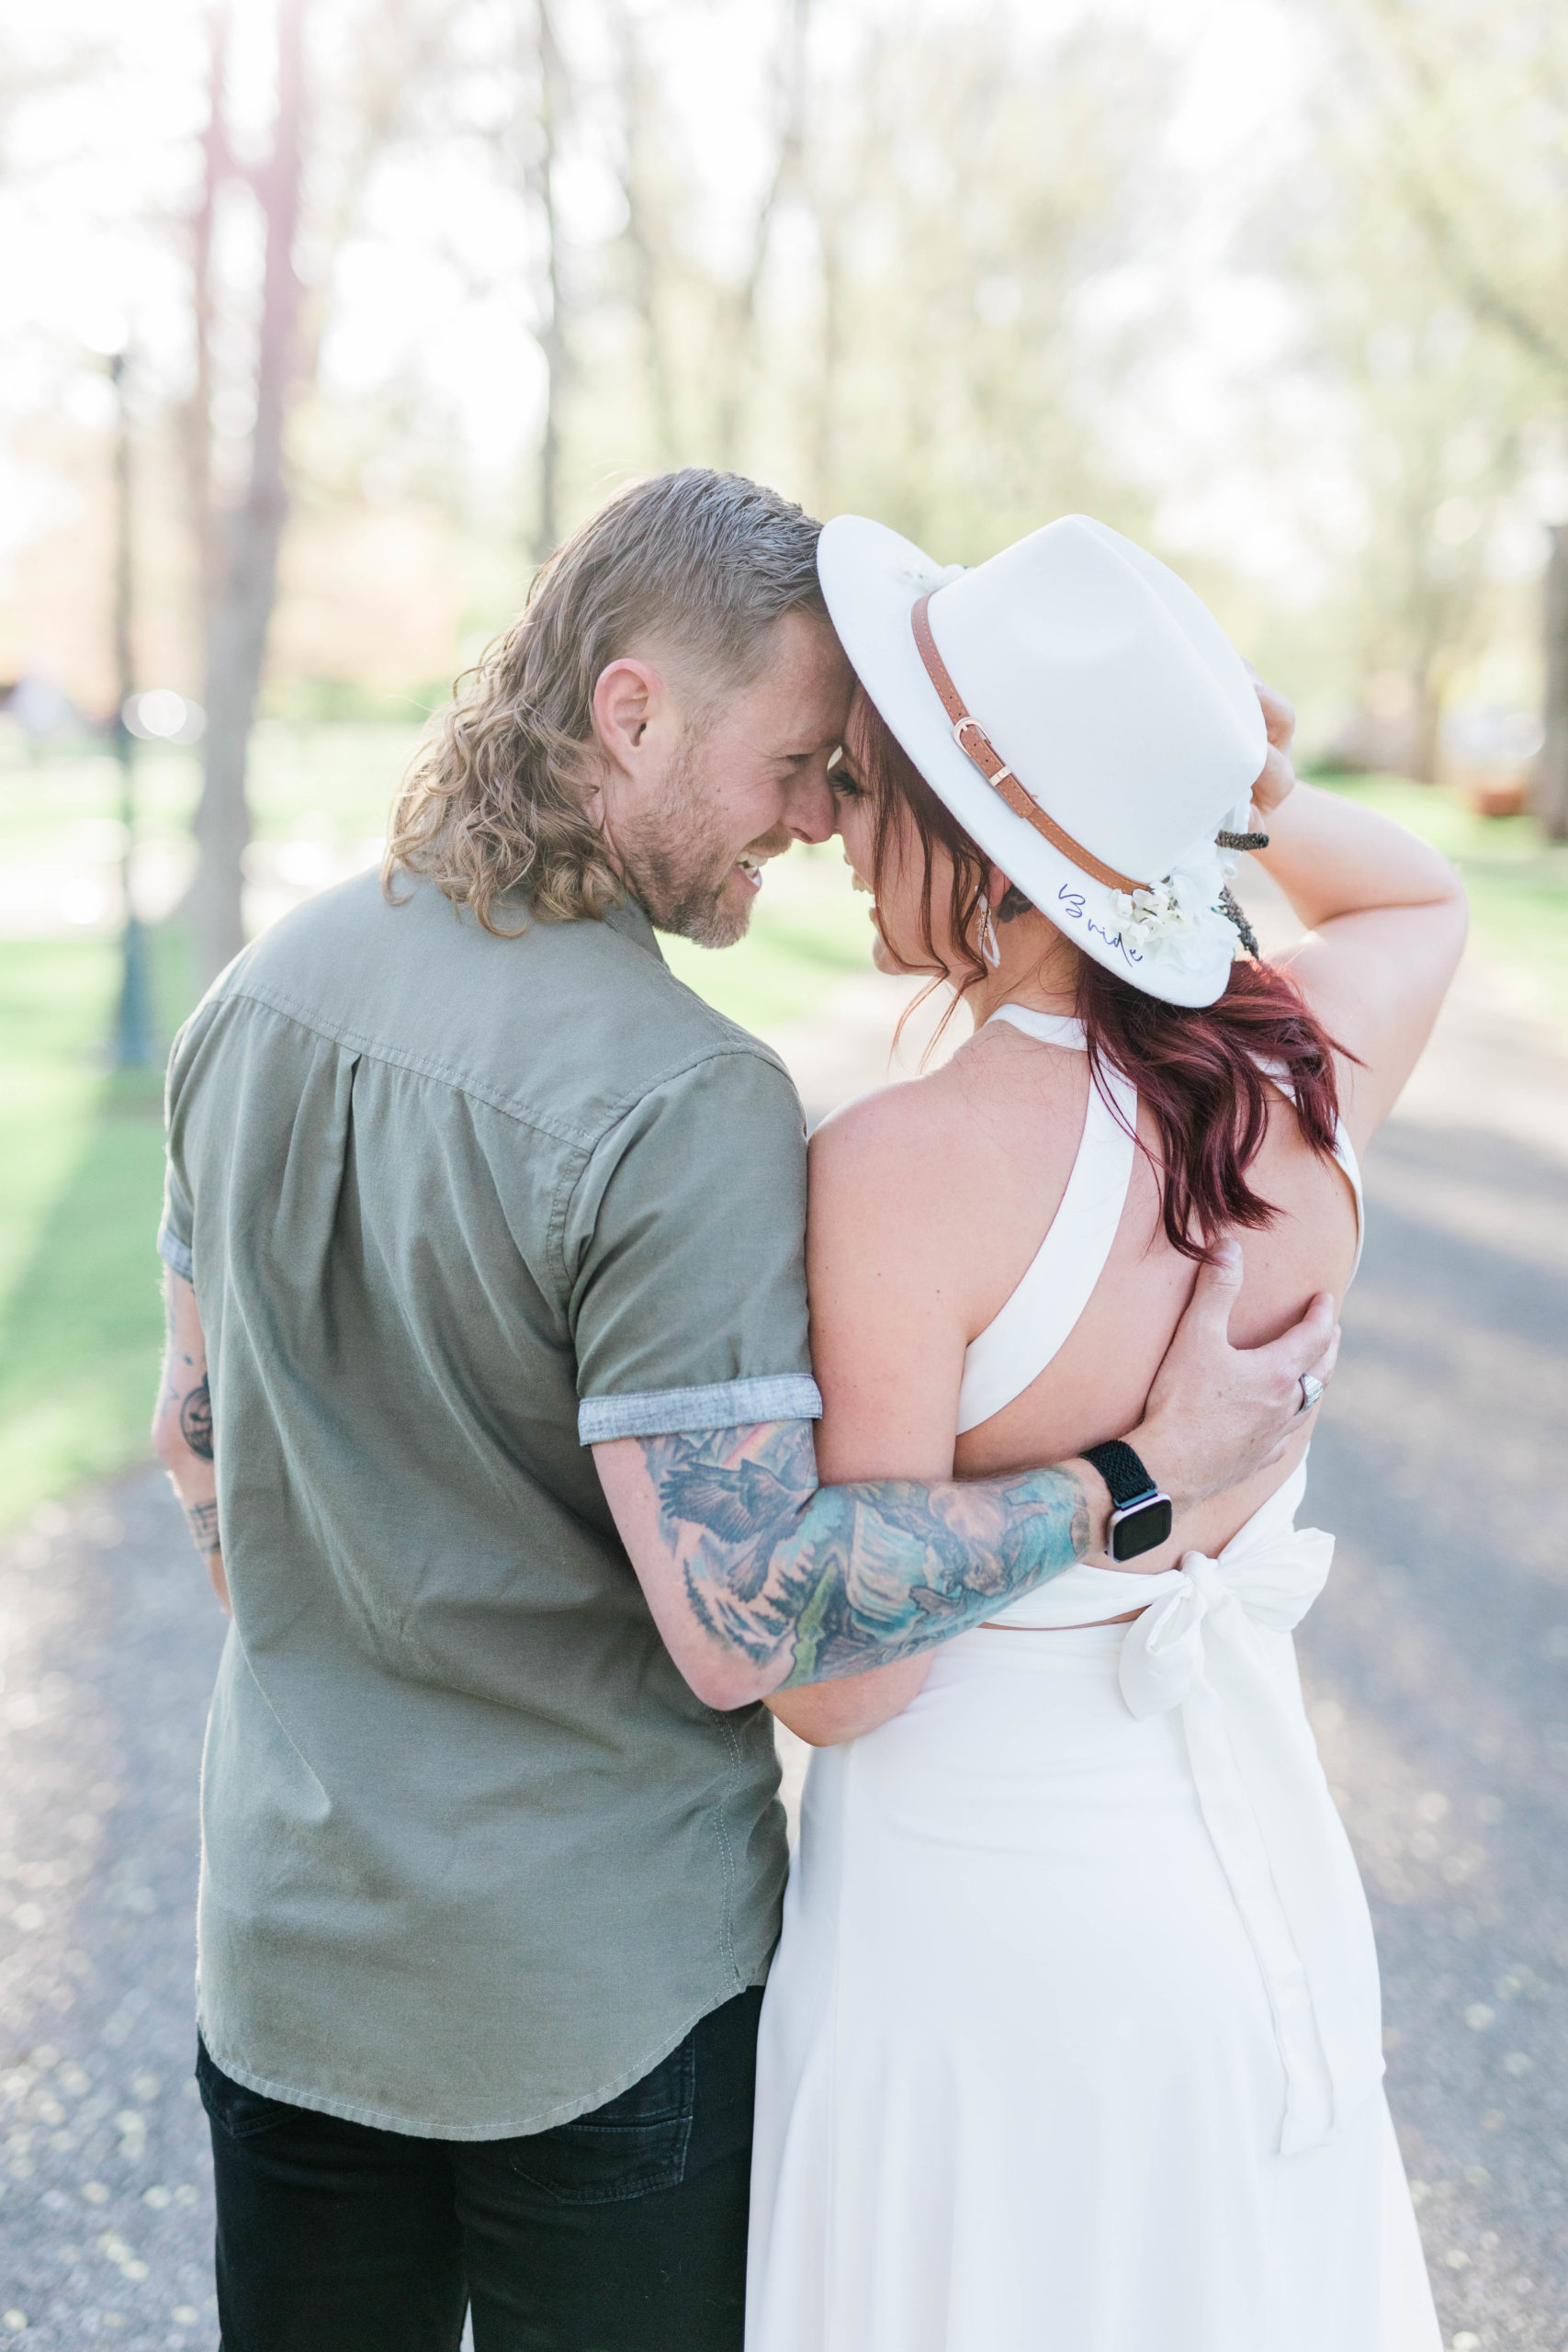 romantic engagement photos in a park in Boise by Boise wedding photographers